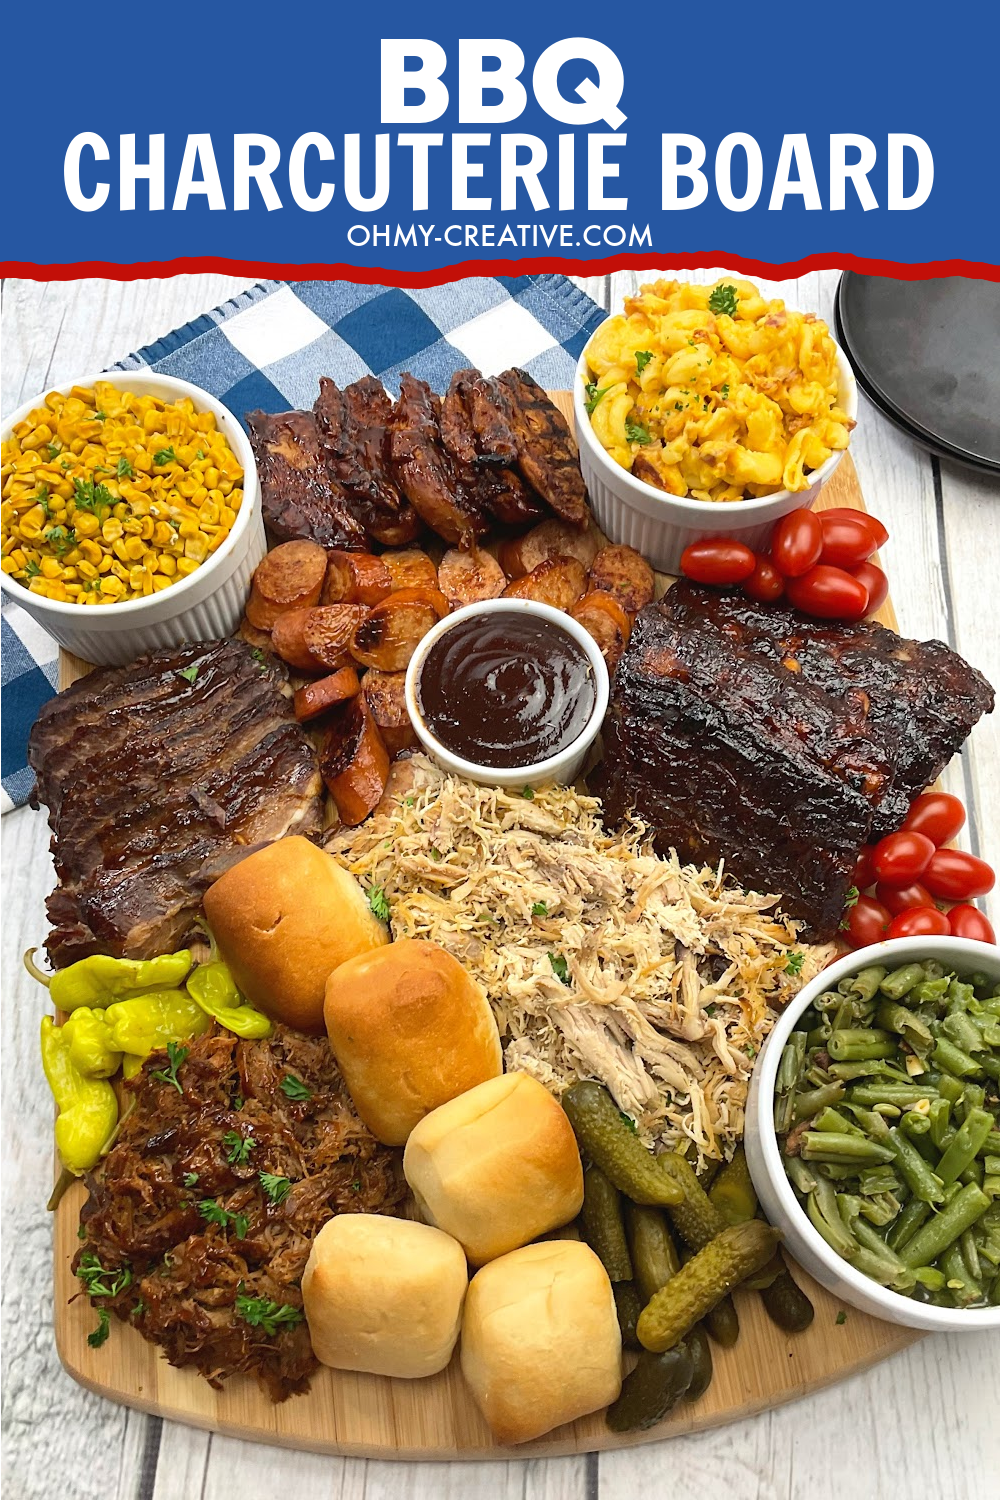 BBQ Charcuterie Board full of cooked BBQ items like meat and side dishes